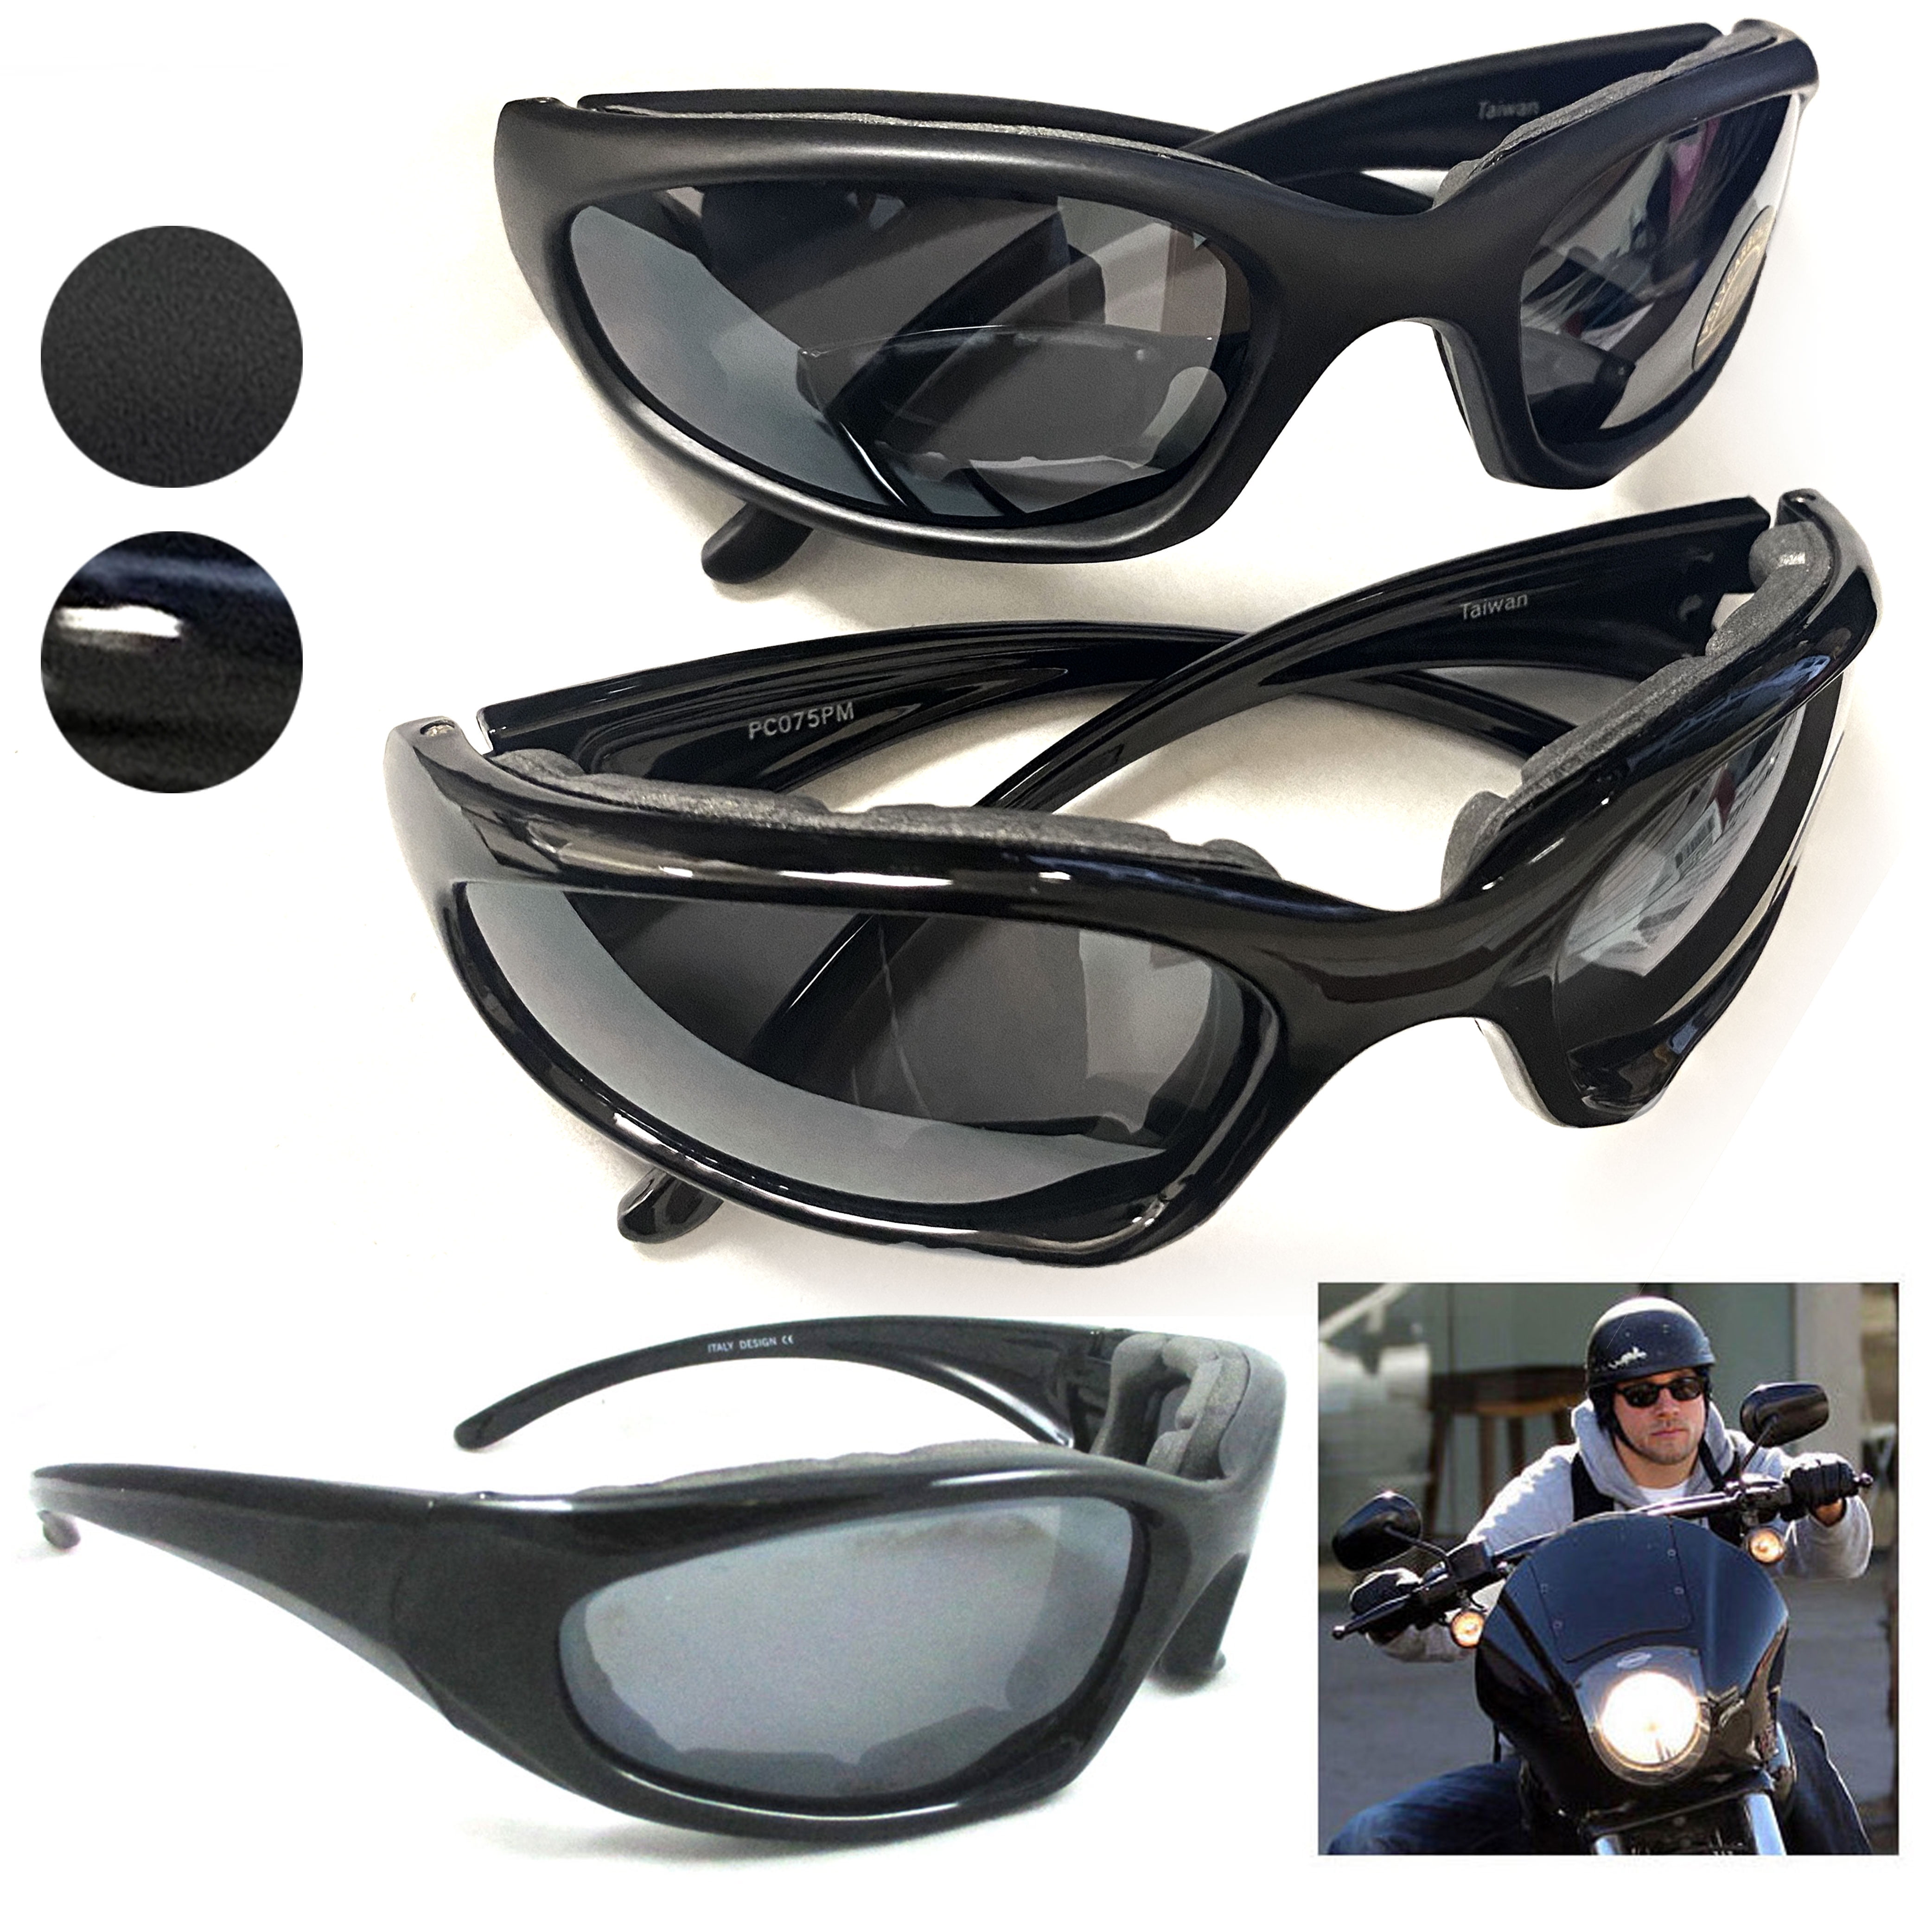 Silver Motorcycle Riding Goggles Padded Sports Biker Sunglasses Mirror Lens 